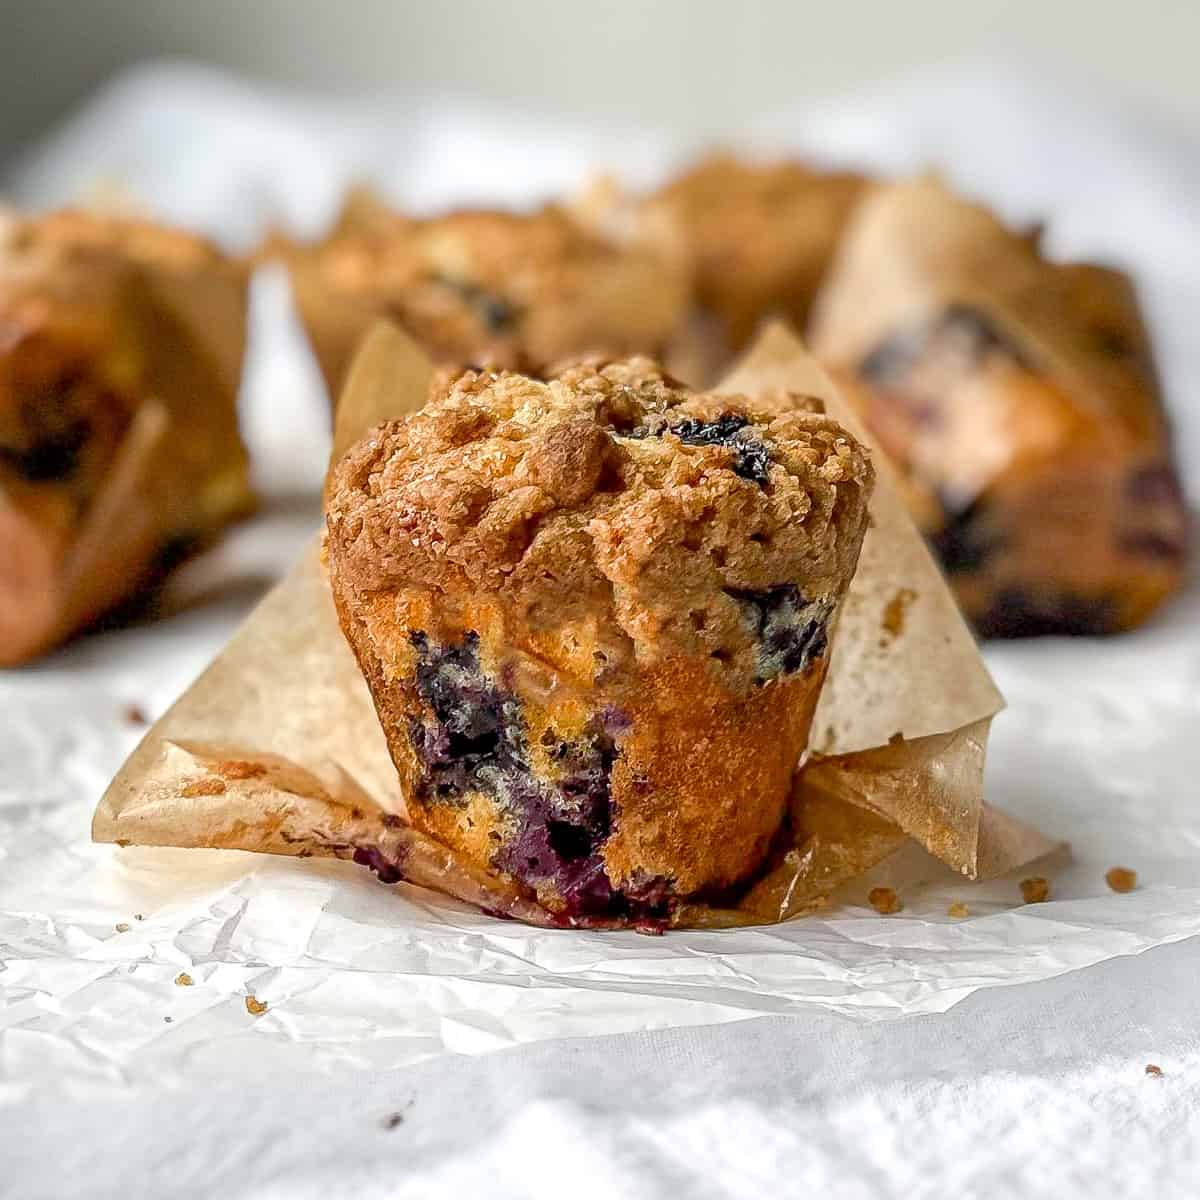 Exterior of a bakery style blueberry streusel muffin with the muffin liner peeled back.